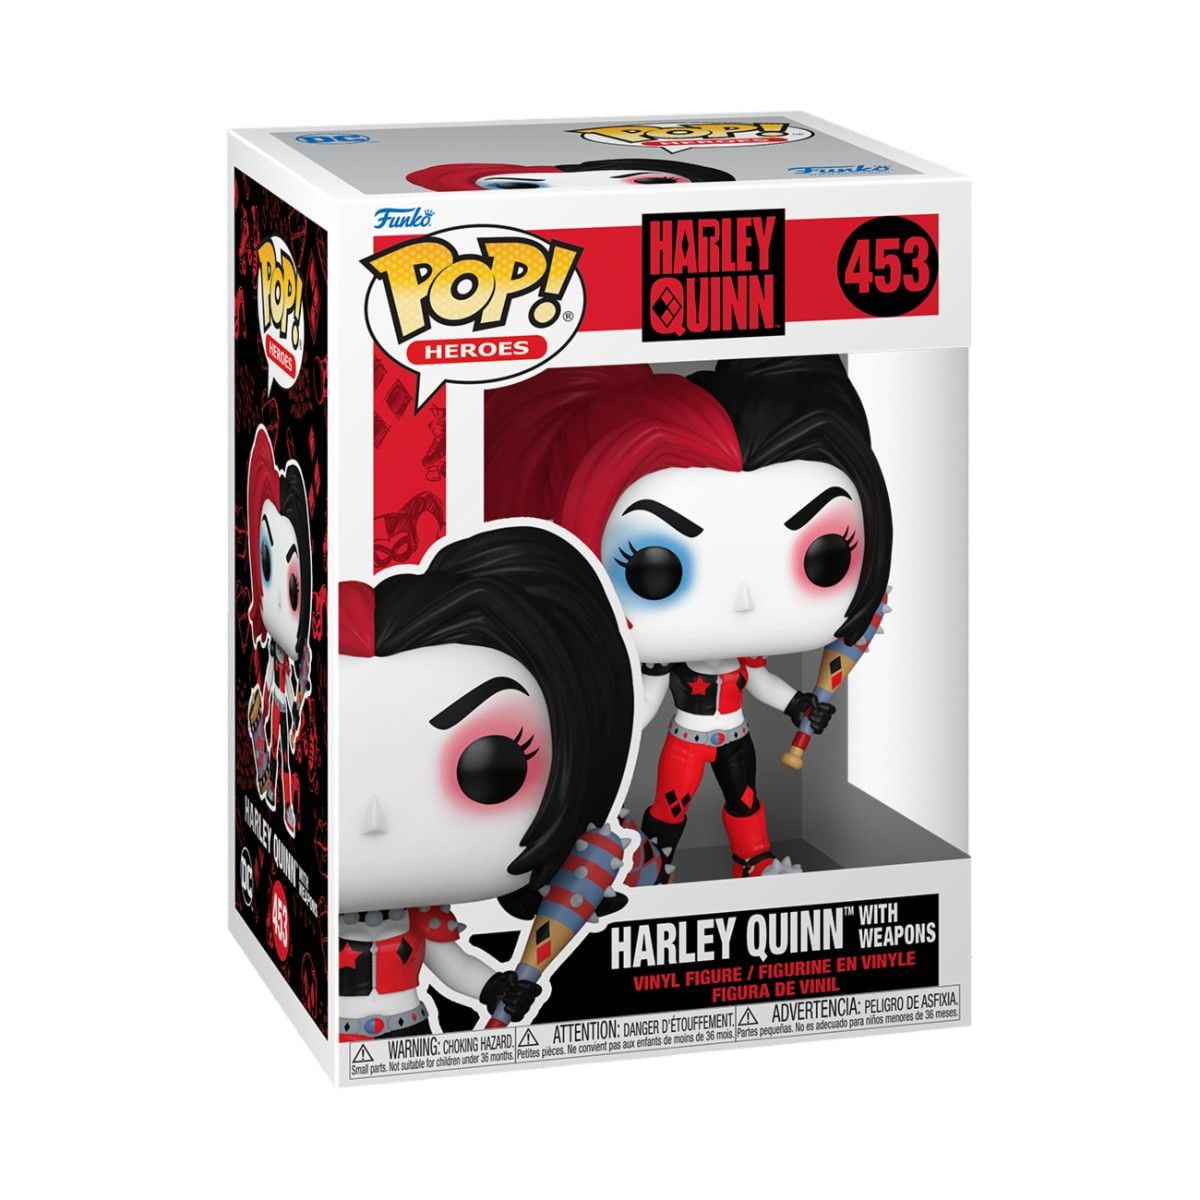 Harley with Weapons - DC - Funko POP! Heroes (453)